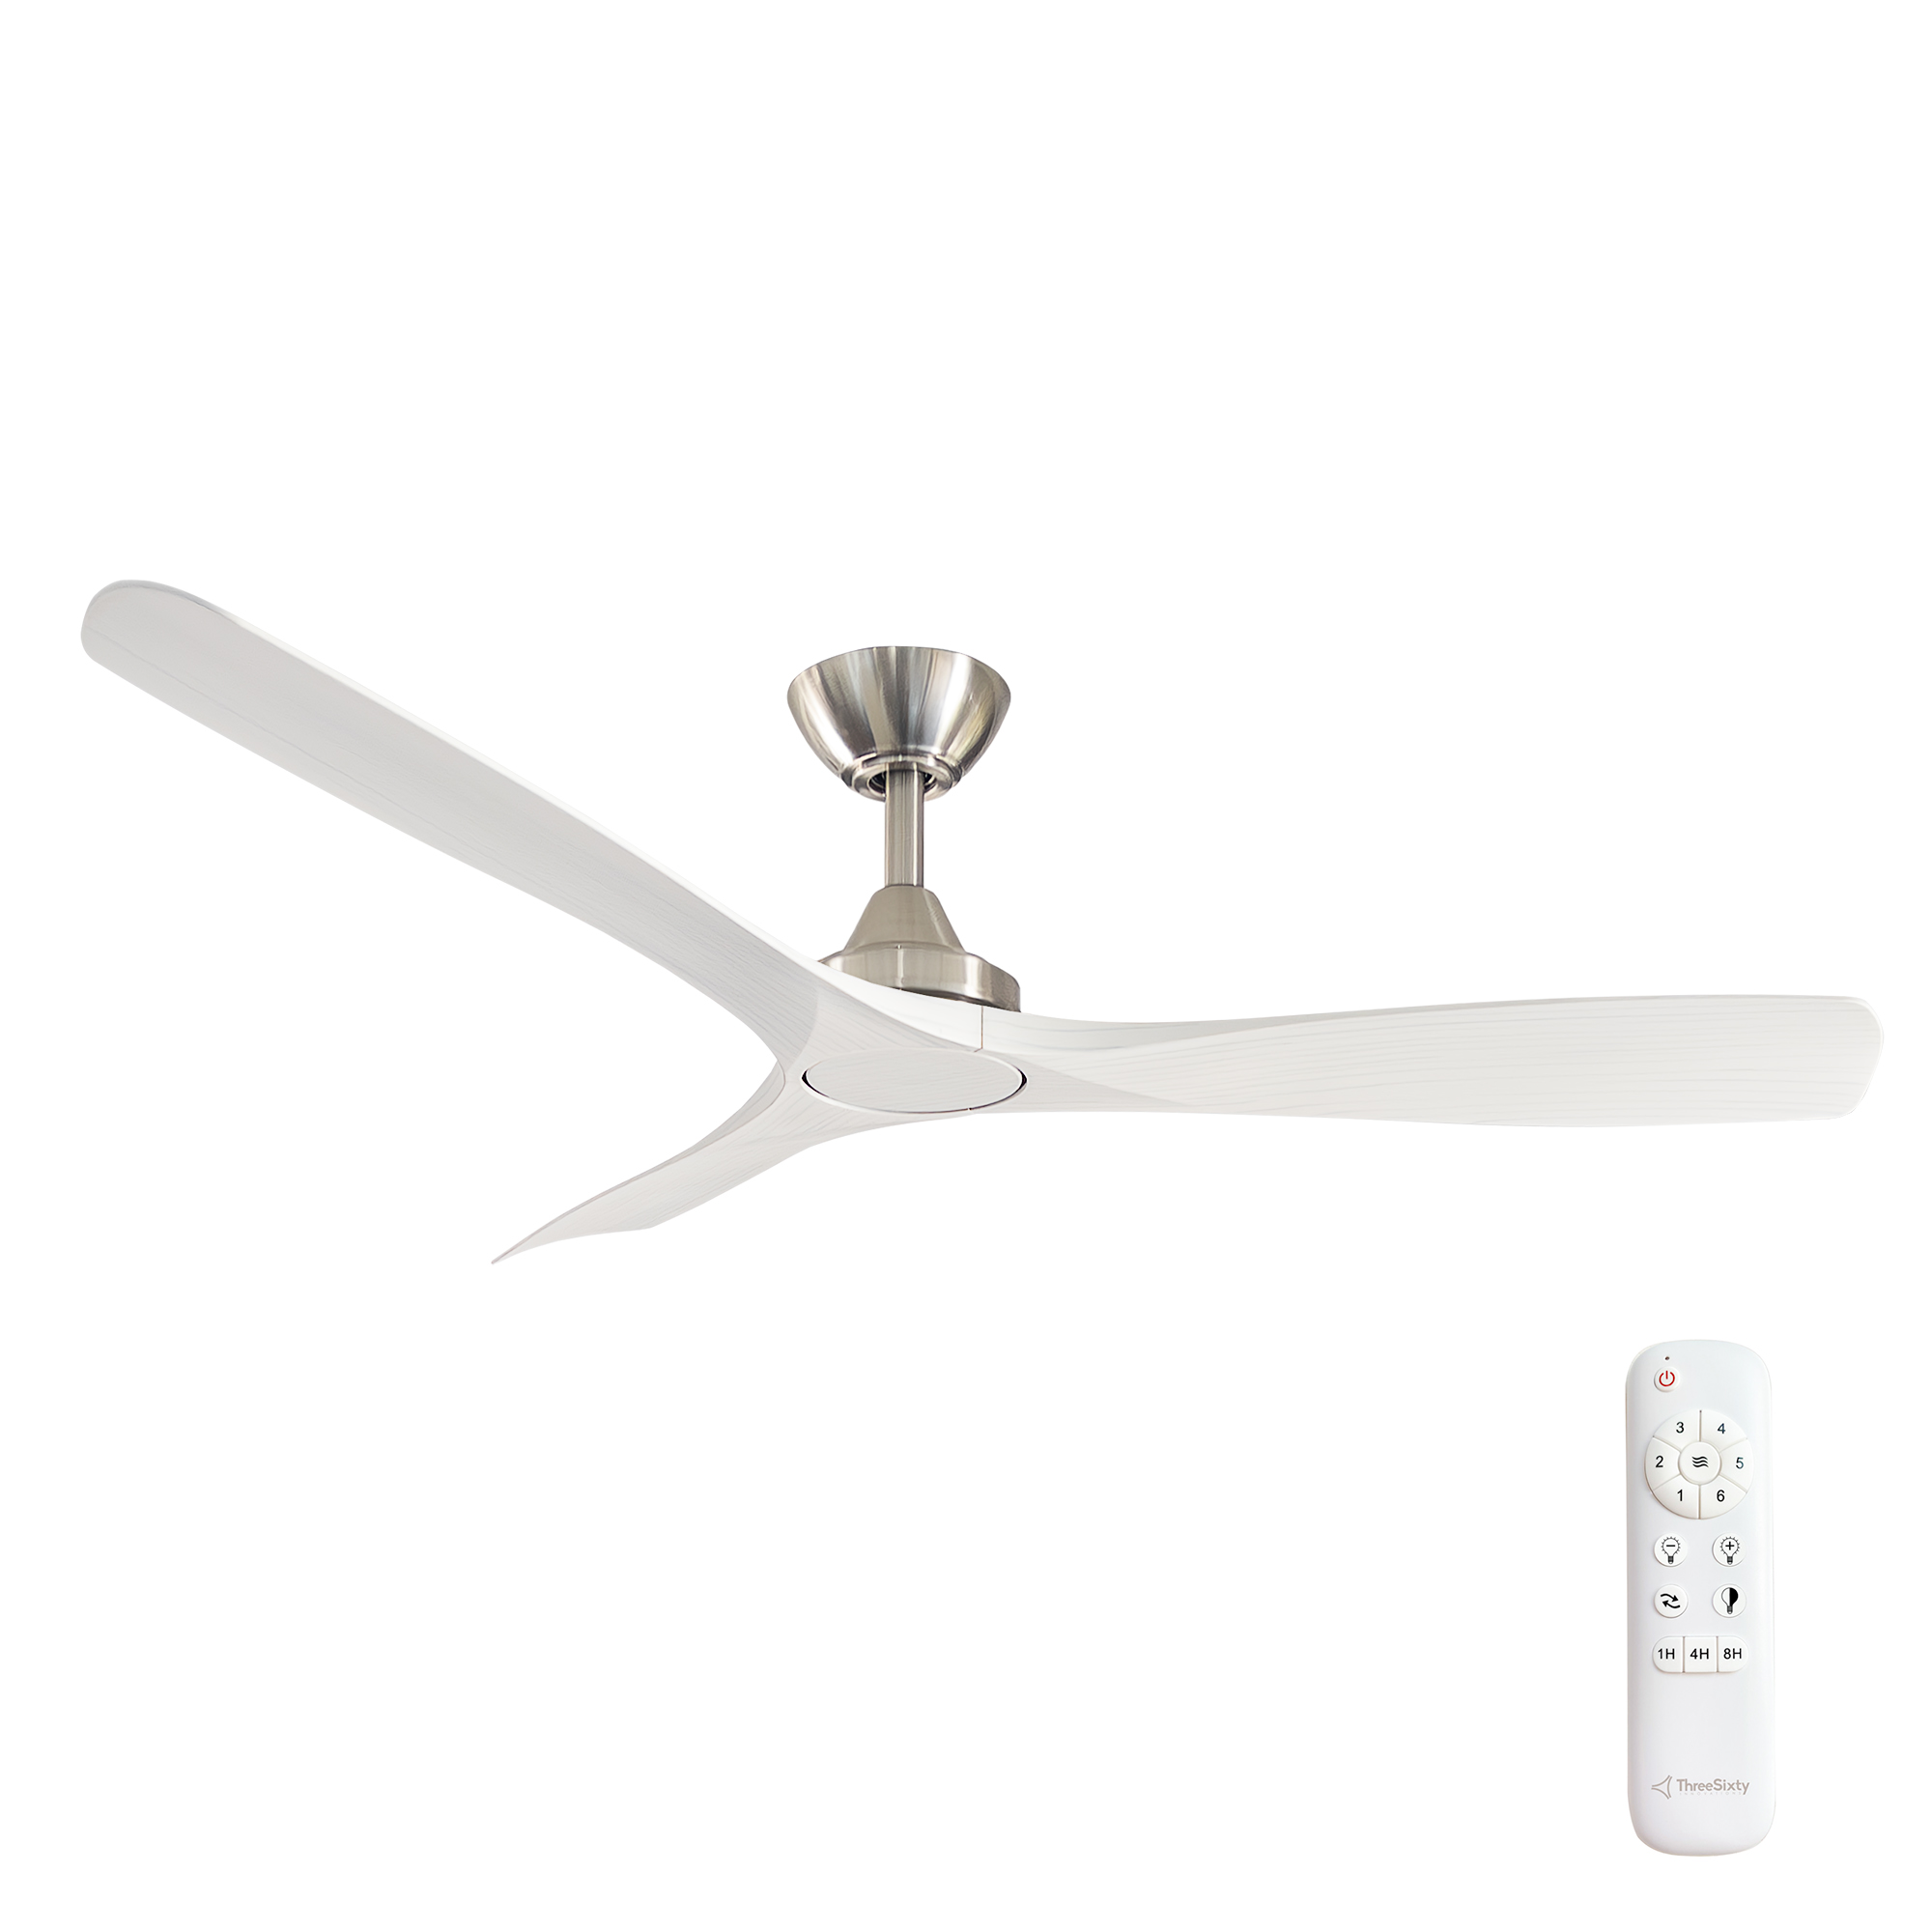 52" Spitfire DC Ceiling Fan in Brushed Nickel with White Wash blades